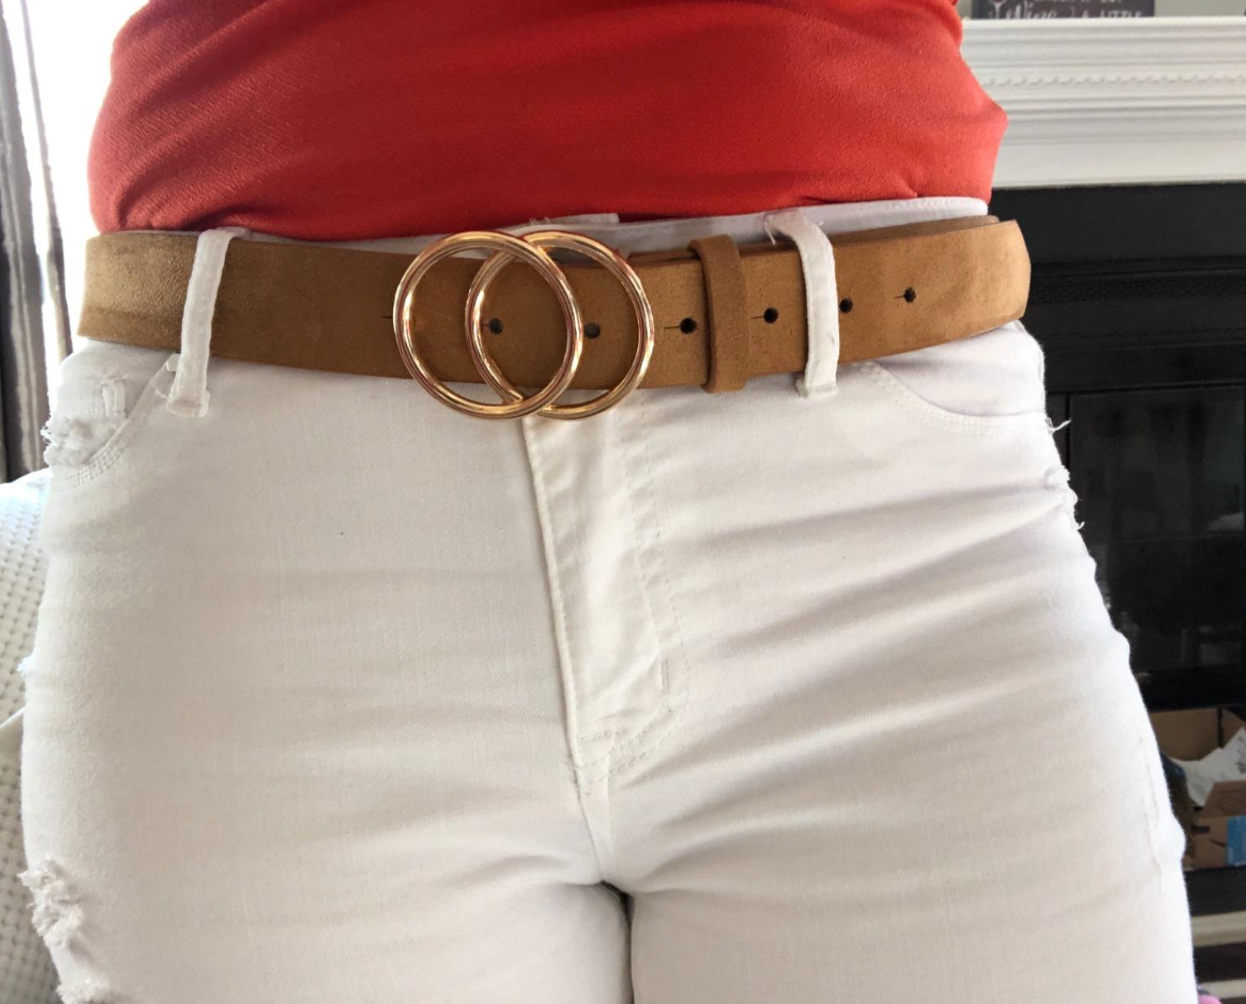 Reviewer photo of the brown leather belt with gold buckle